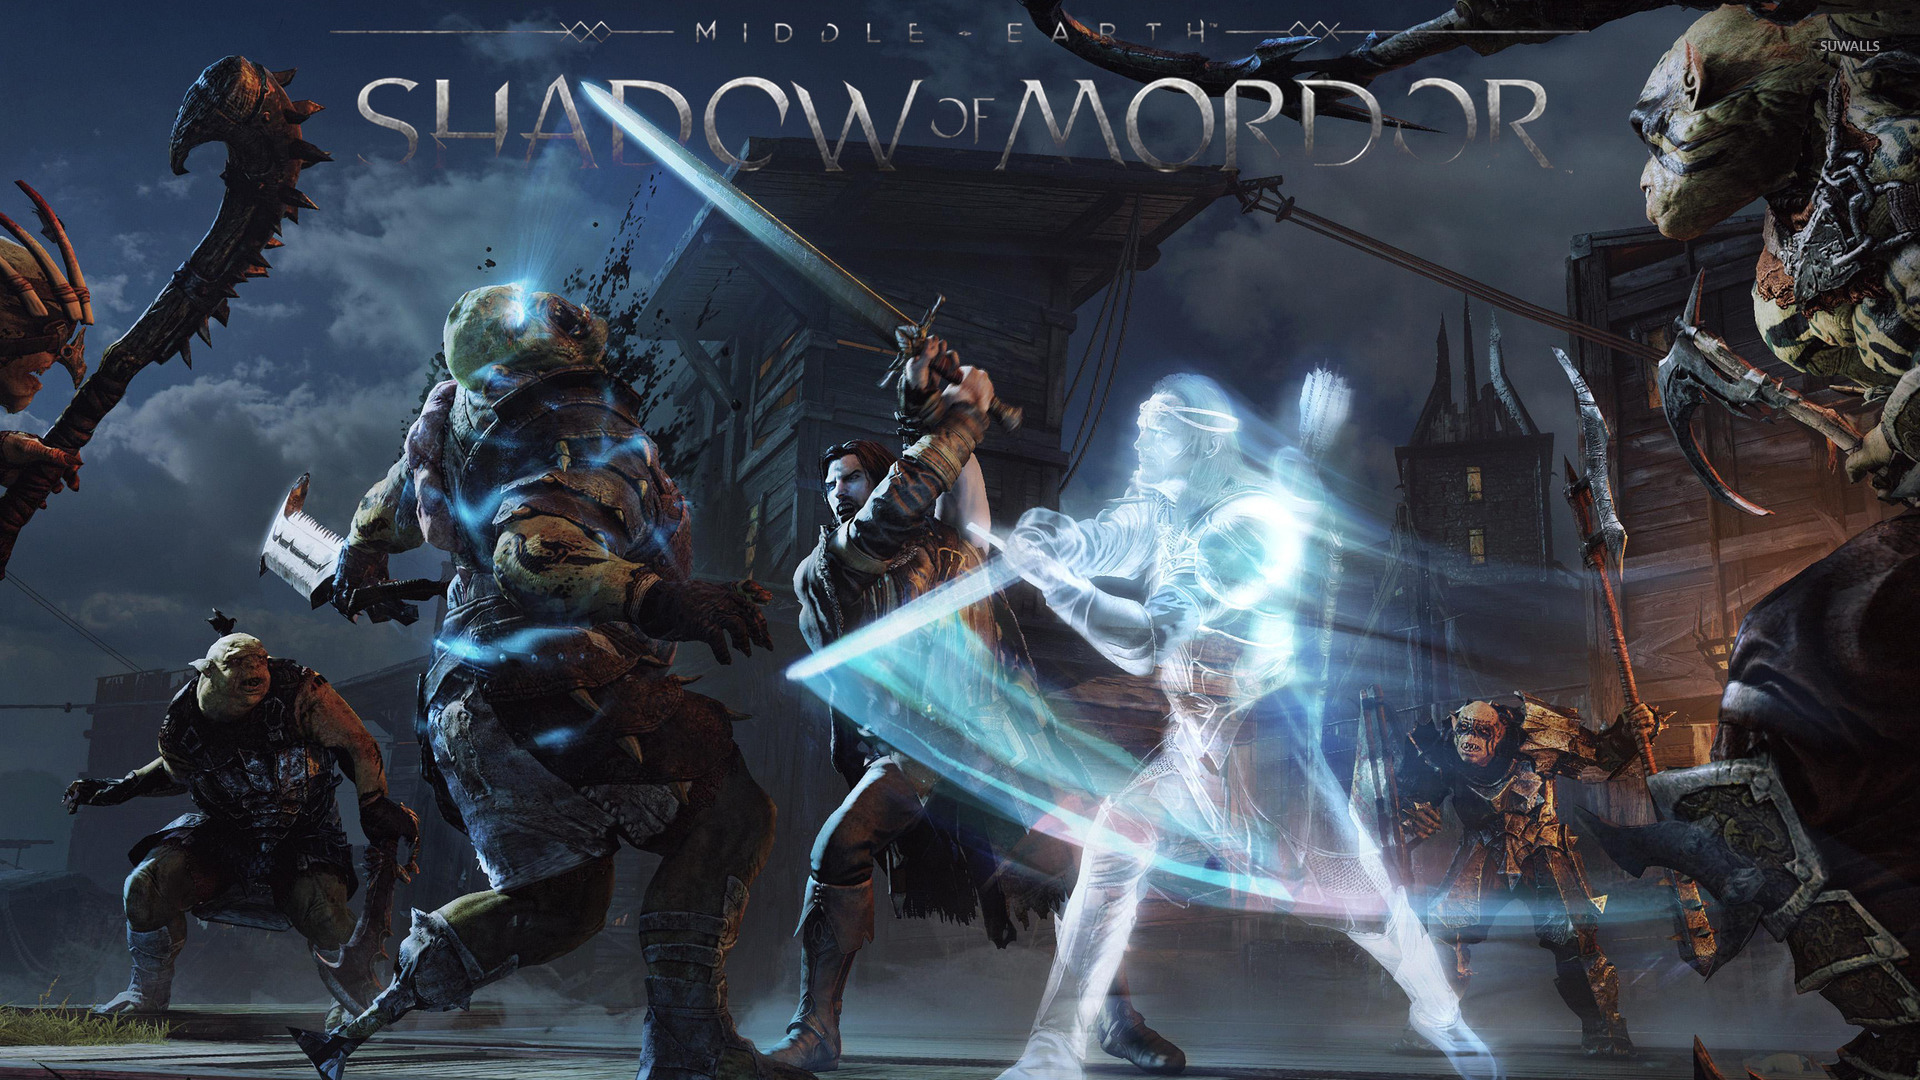 Middle earth Shadow of Mordor [4] wallpaper   Game